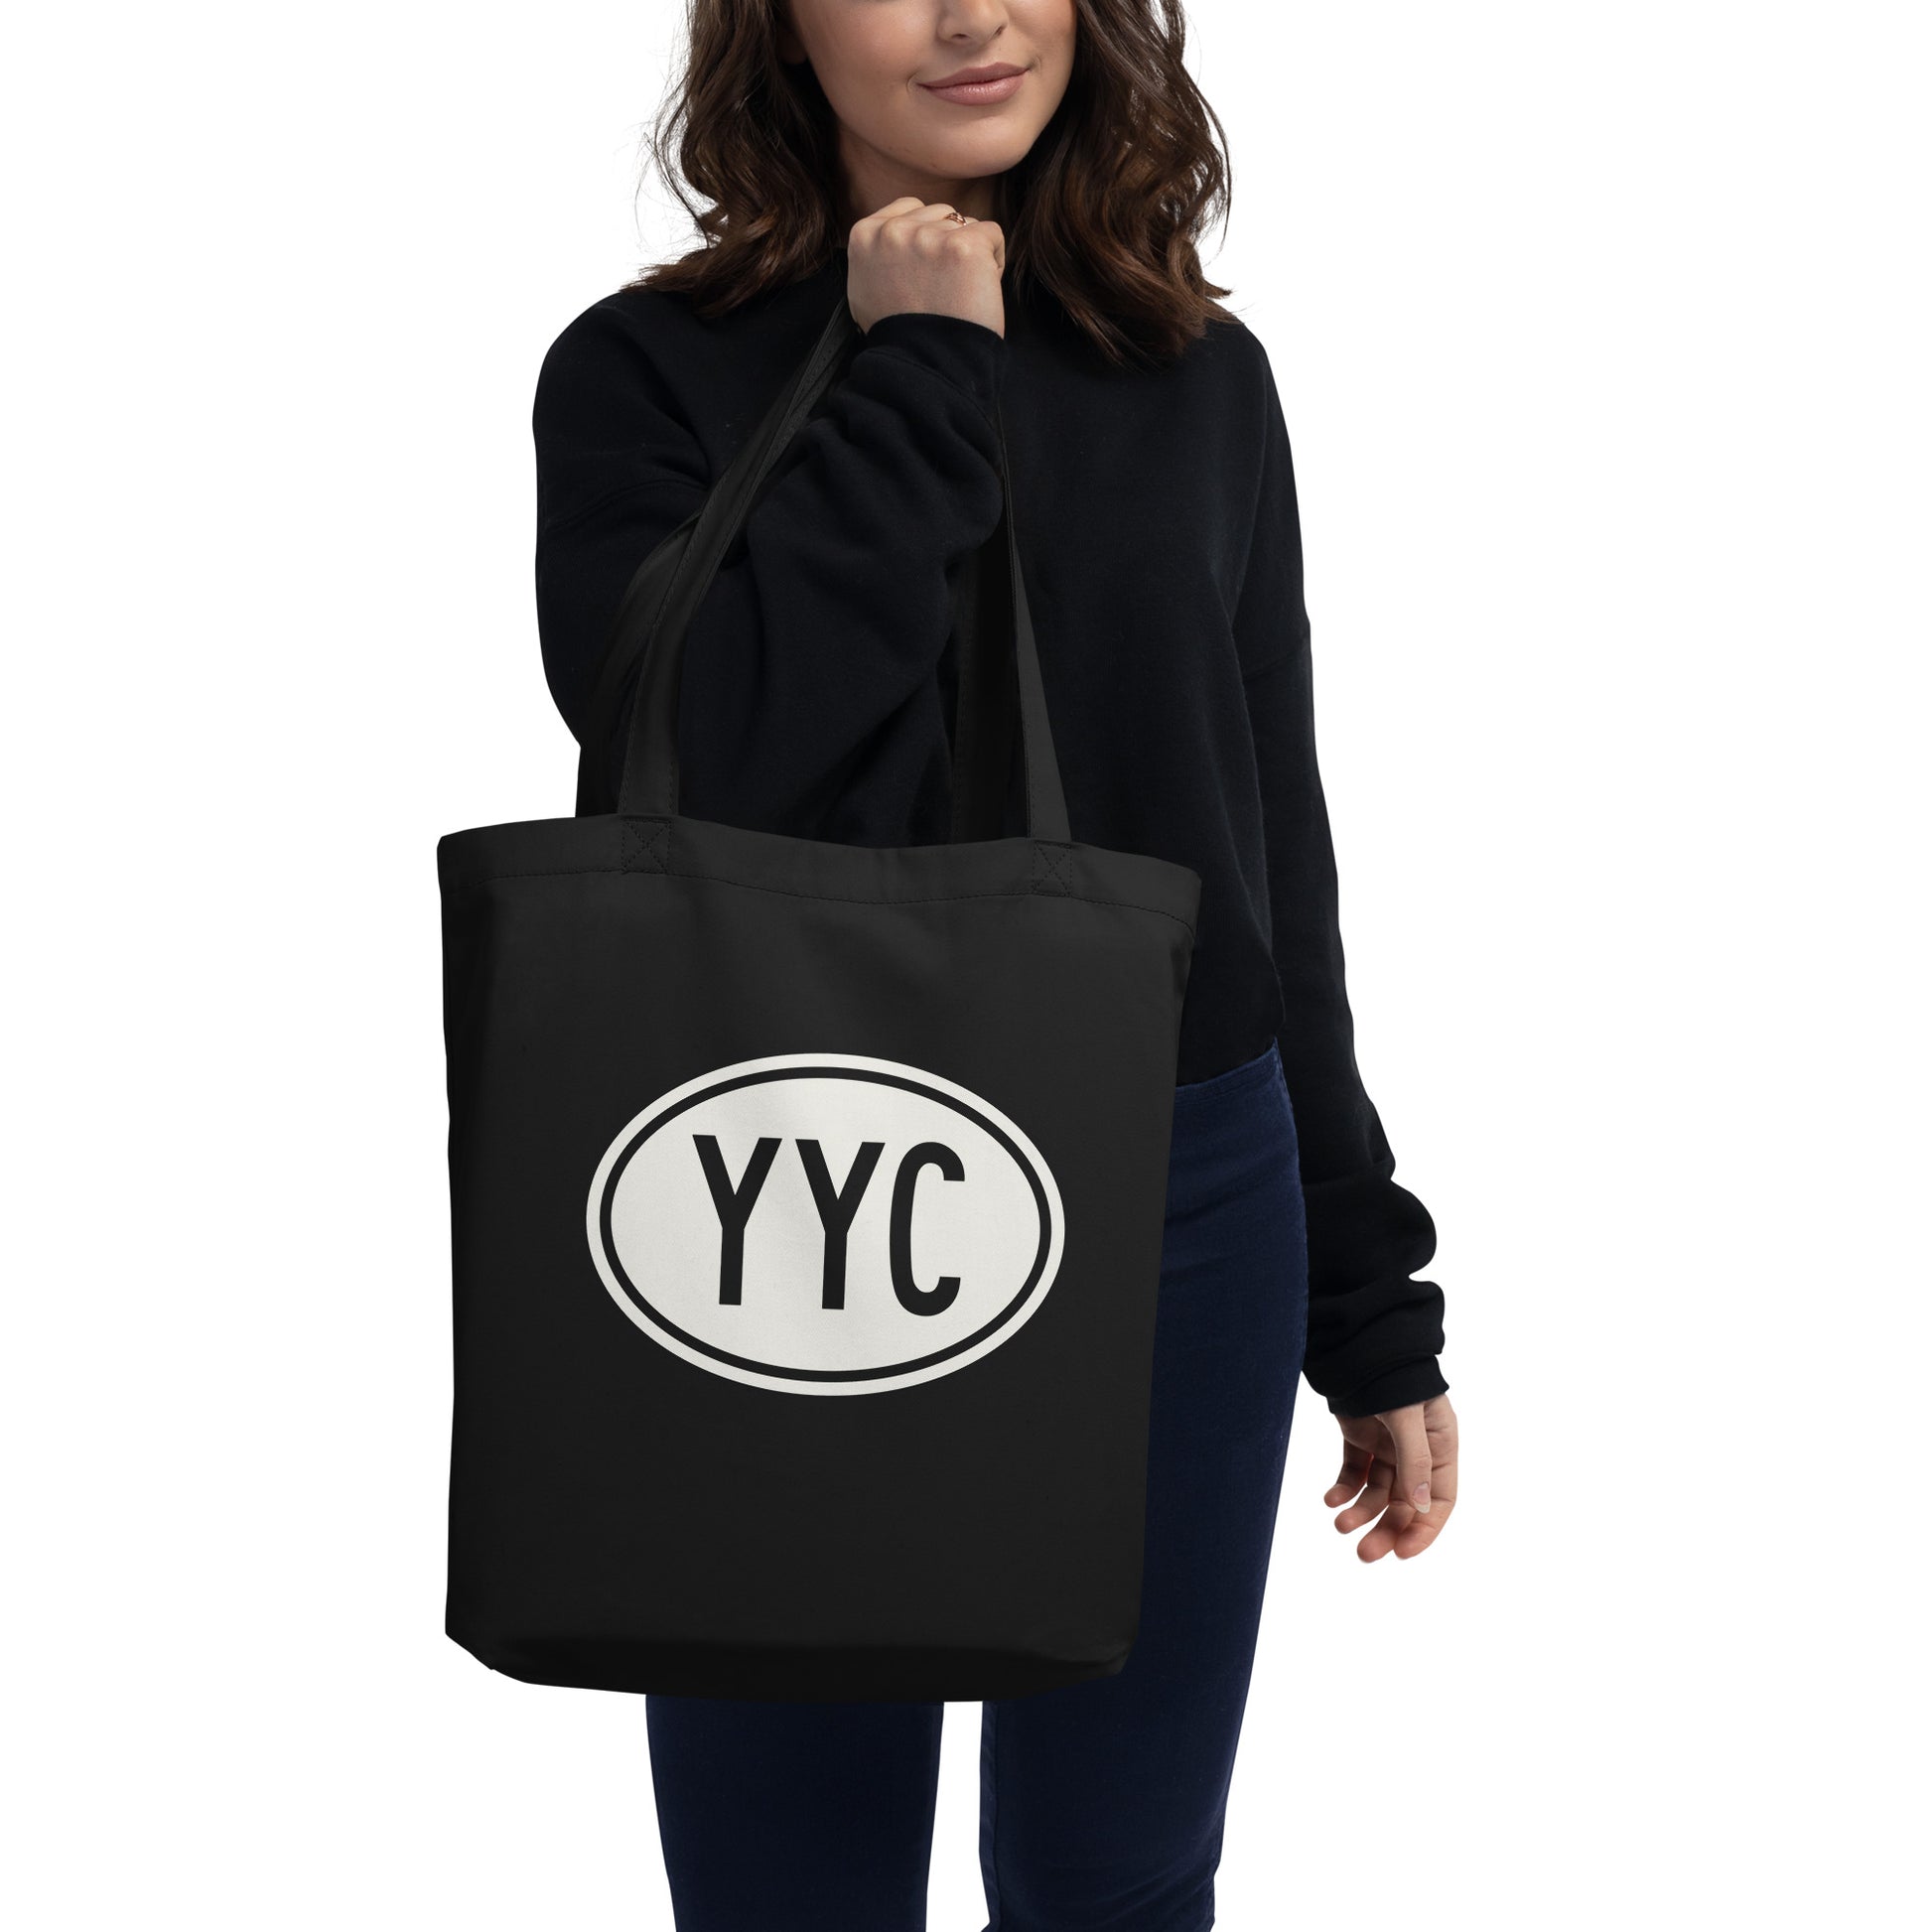 Unique Travel Gift Organic Tote - White Oval • YYC Calgary • YHM Designs - Image 03